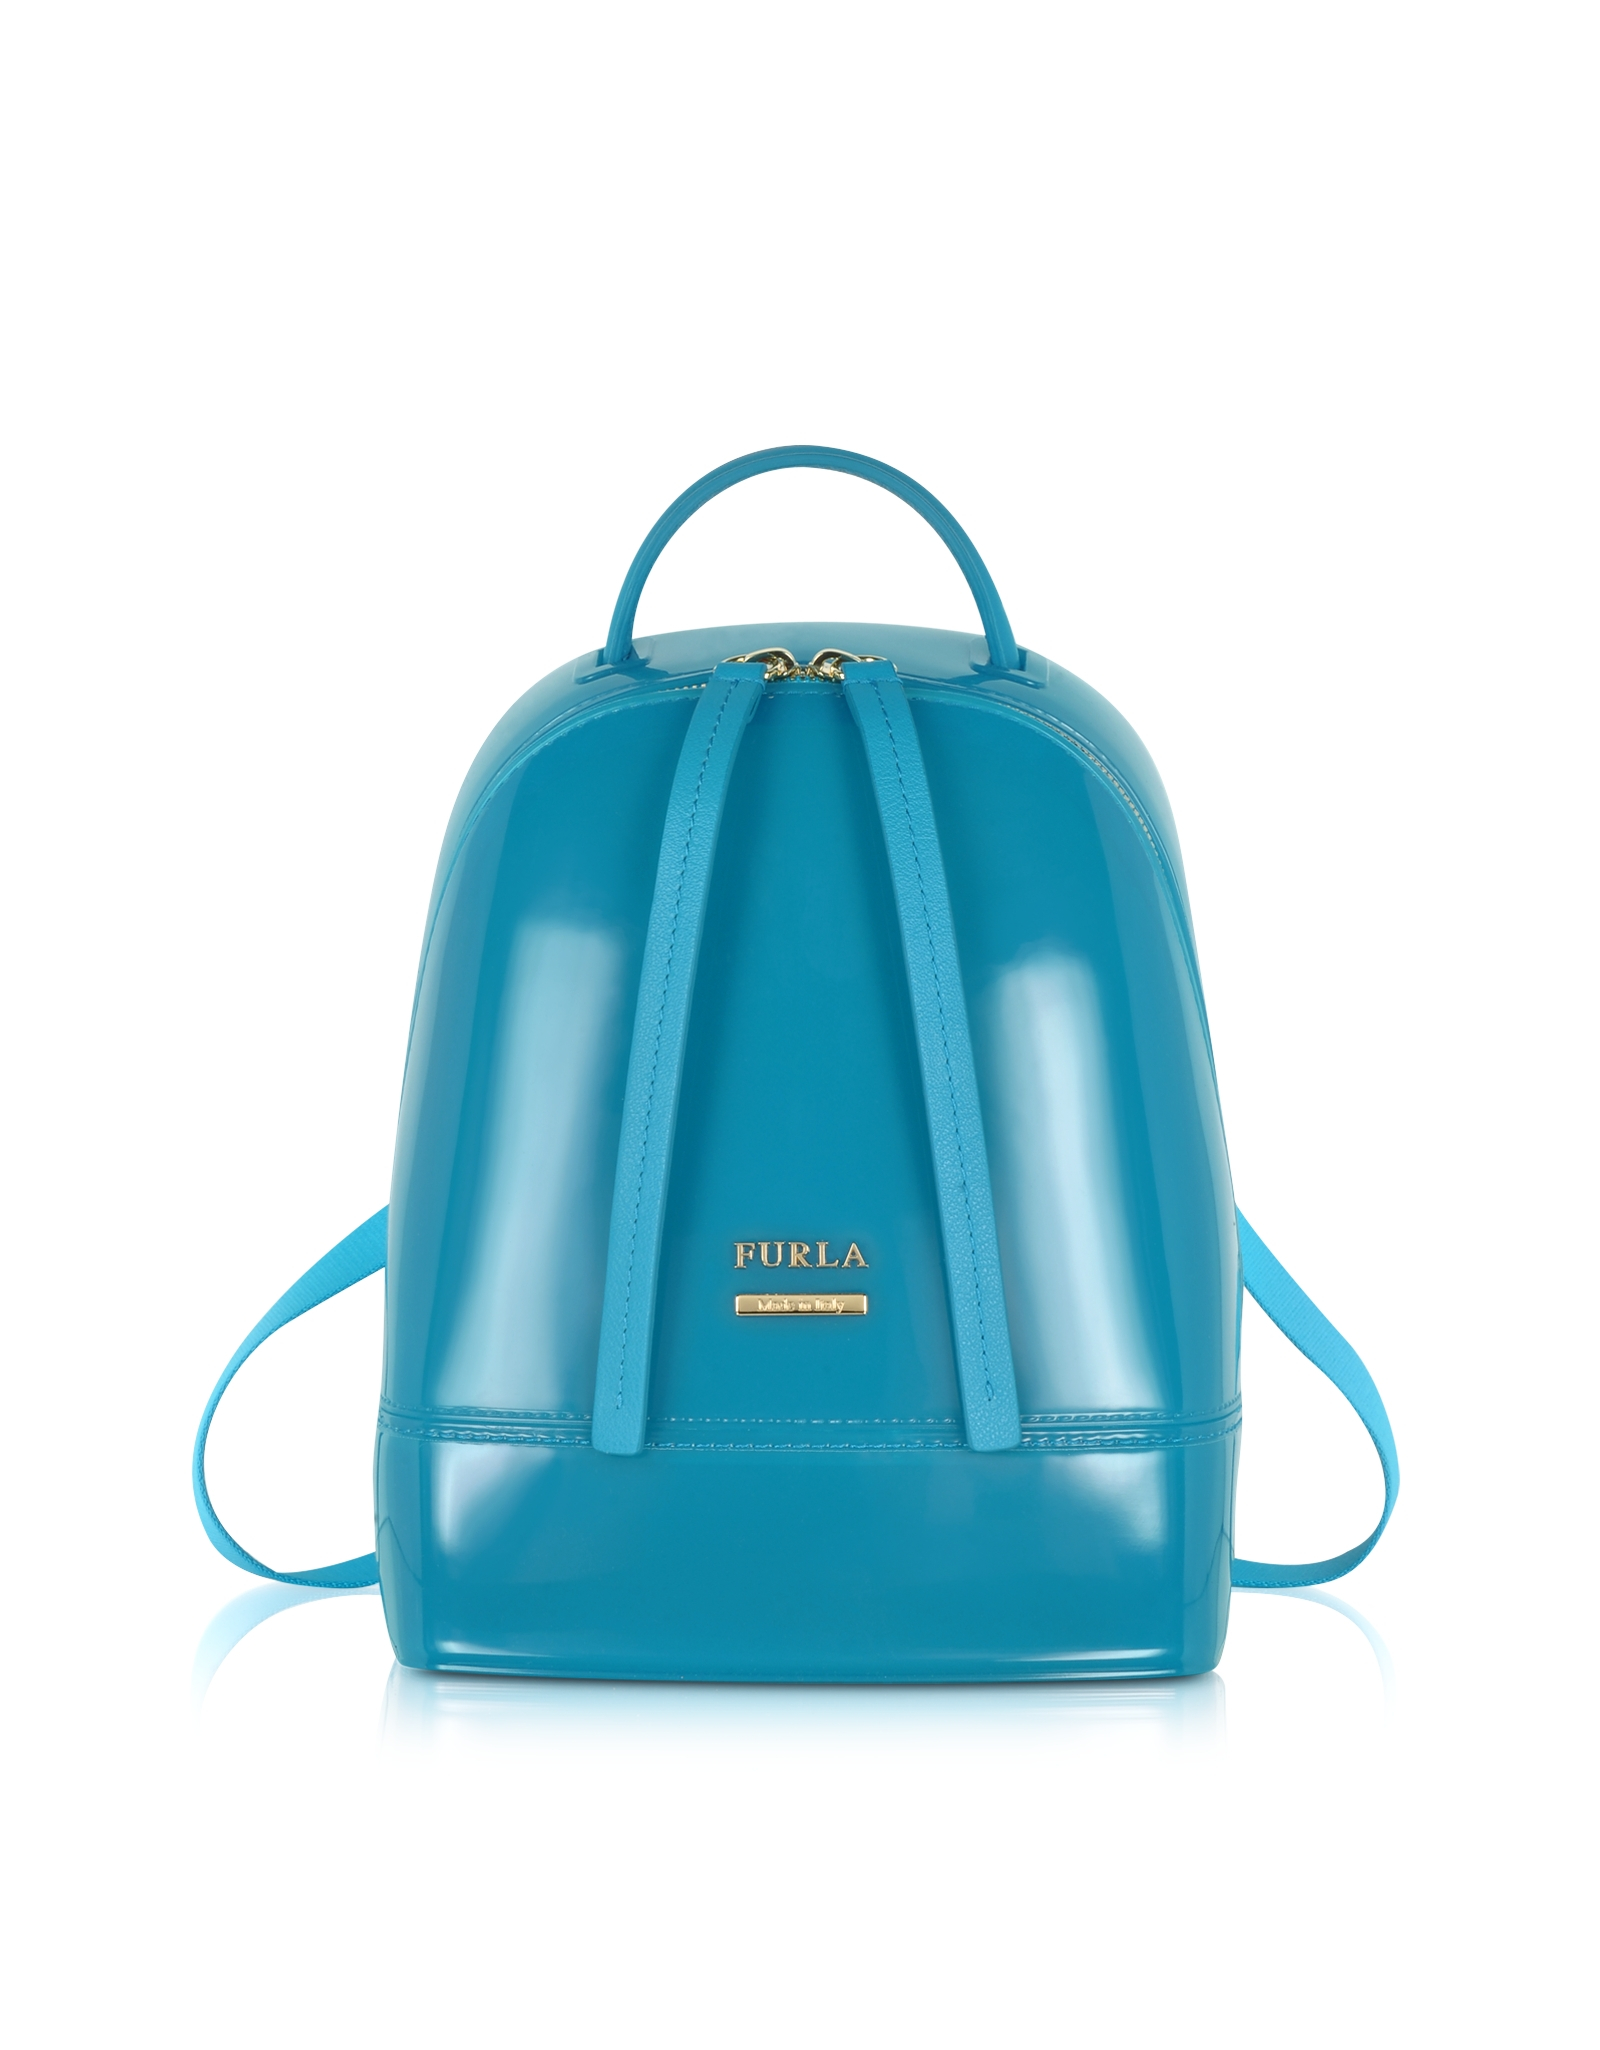 Lyst - Furla Candy Jelly Rubber Mini Backpack in Blue